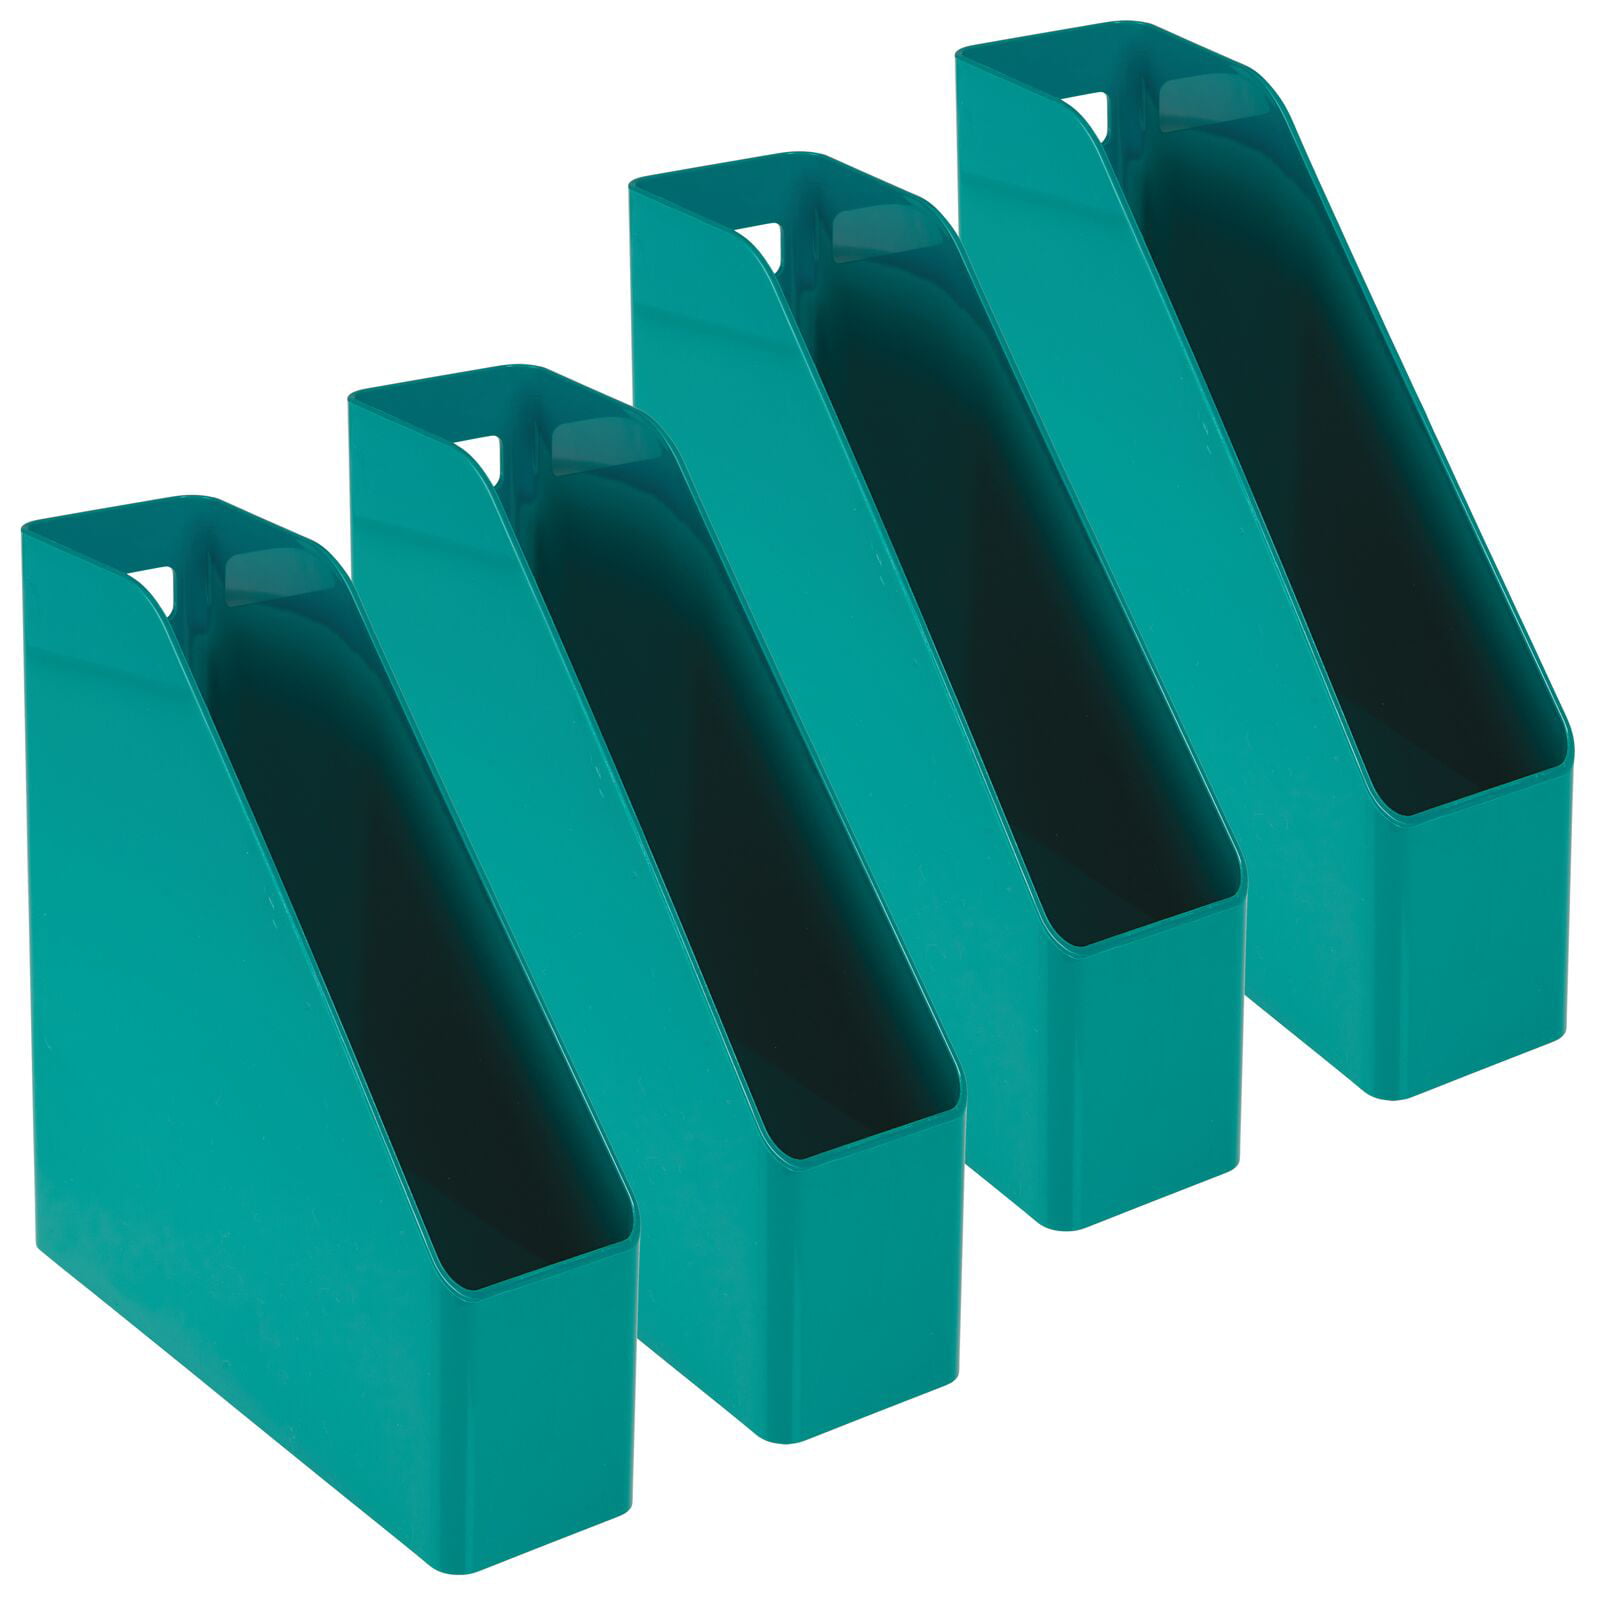 Vertical with Handle 4 Pack Binders mDesign Plastic Sturdy File Folder Bin Storage Organizer Container for Home Office and Work Desktops Teal Blue Holds Notebooks Envelopes Magazines 